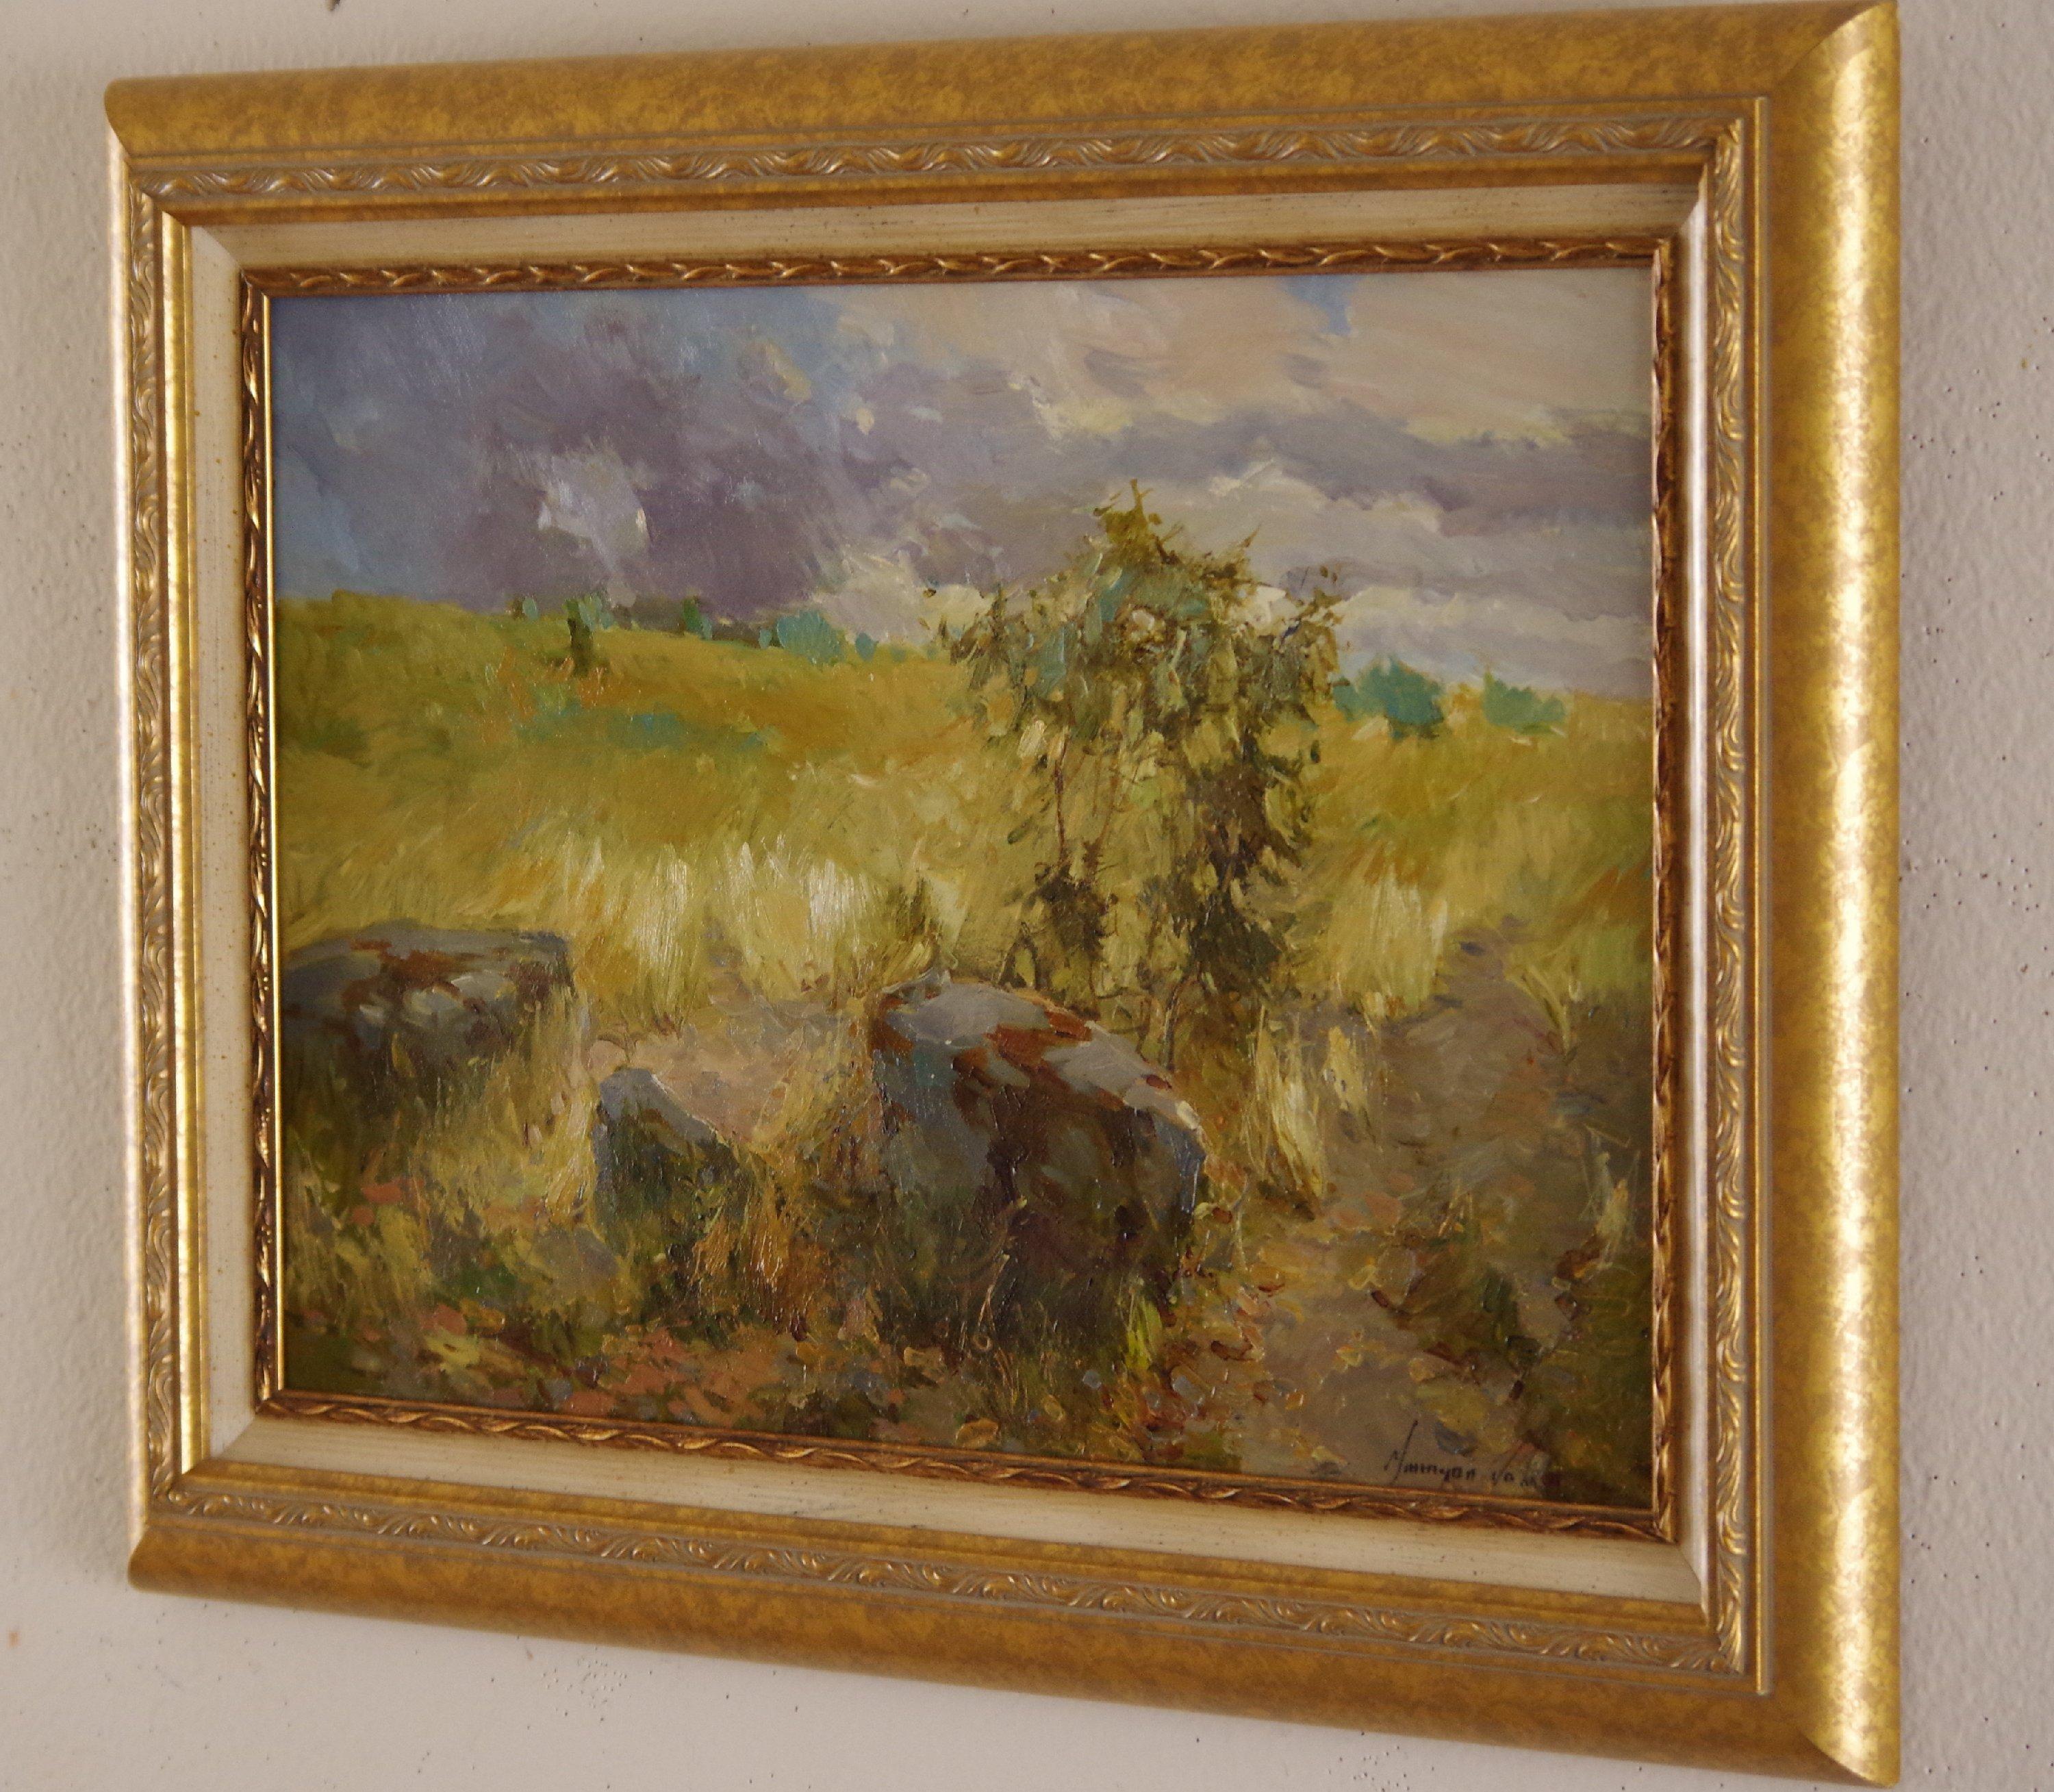 Artist: Vahe Yeremyan
Work: Original oil Painting, One of a Kind
Medium: Oil on Canvas
Year: 2016
Subject: Path Through the meadow
SIZE: 14